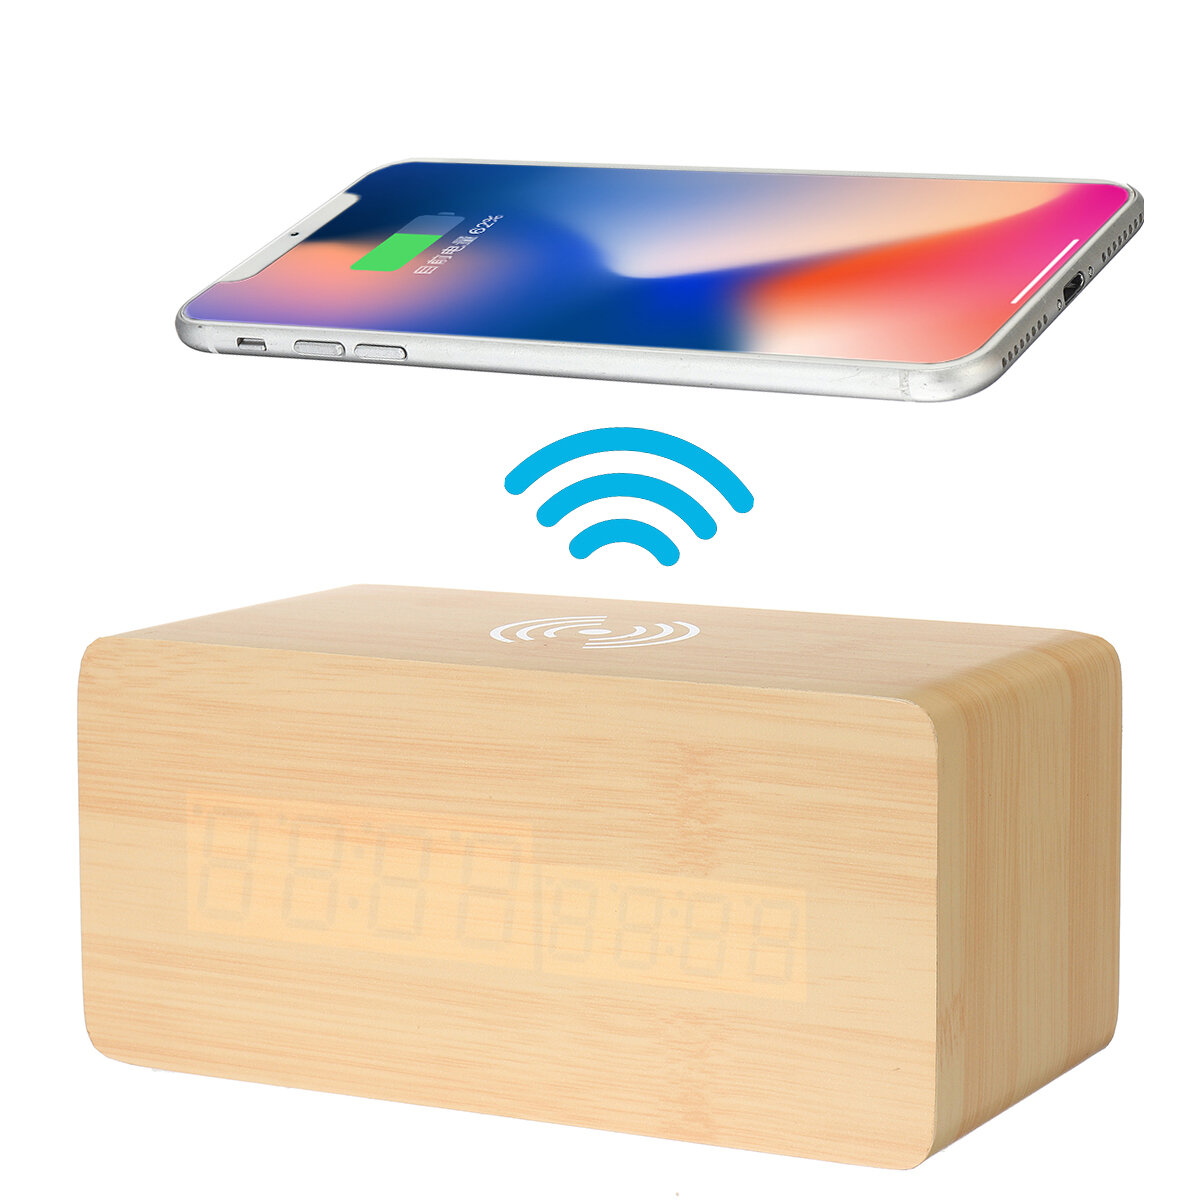 Bakeey 3 in 1 Qi Wireless Charger & LED Digital Alarm Clock & Thermometer Modern Wooden